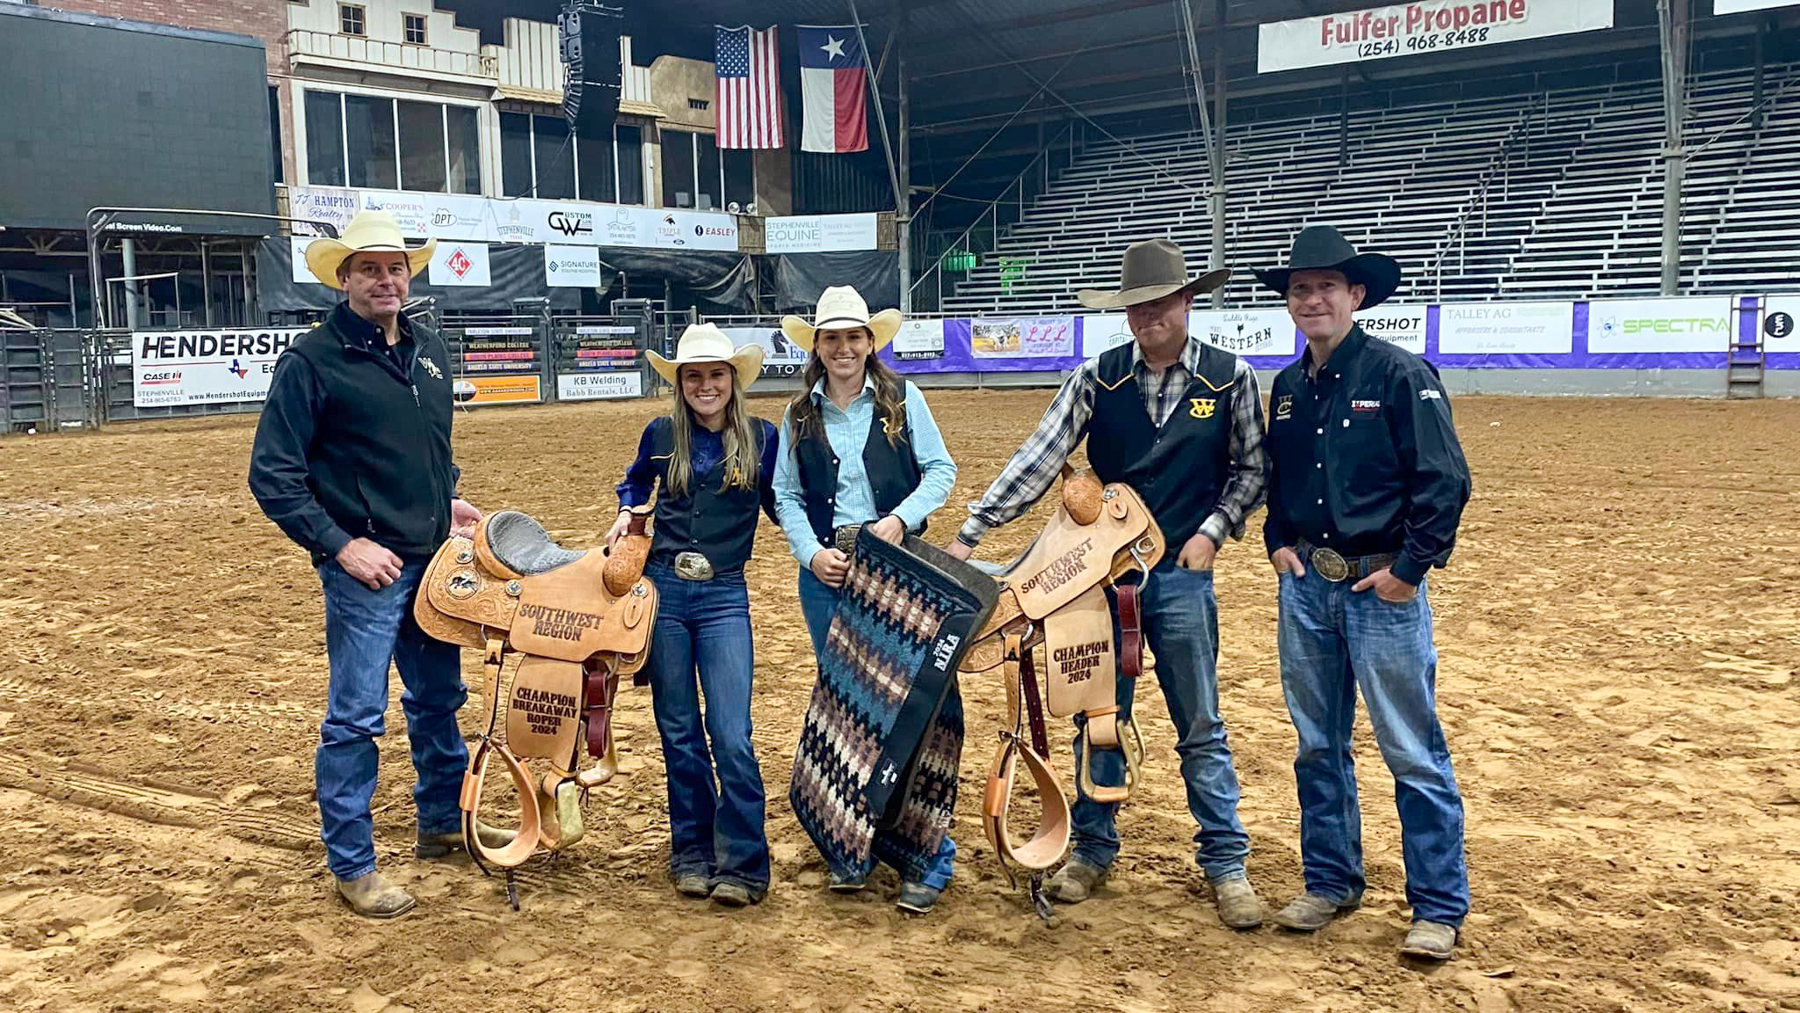 Three Coyotes headed to CNFR, another three to NFSR